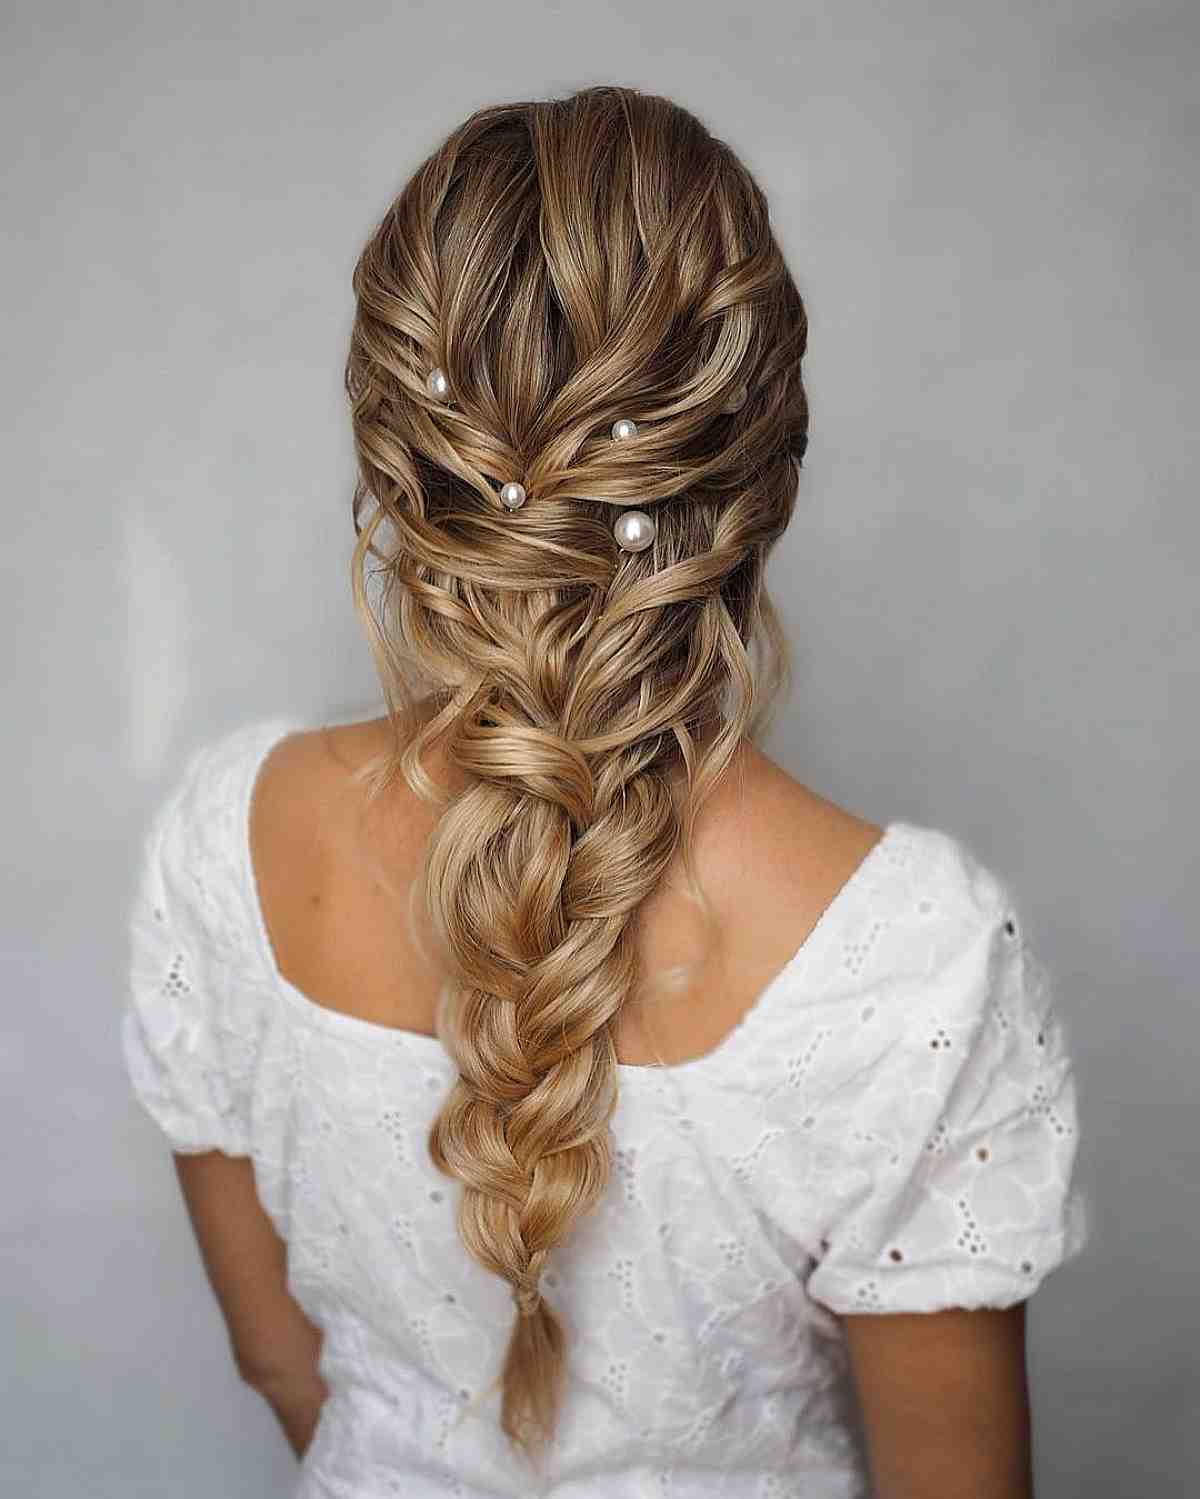 Long Loose Braids with Pearls for Weddings